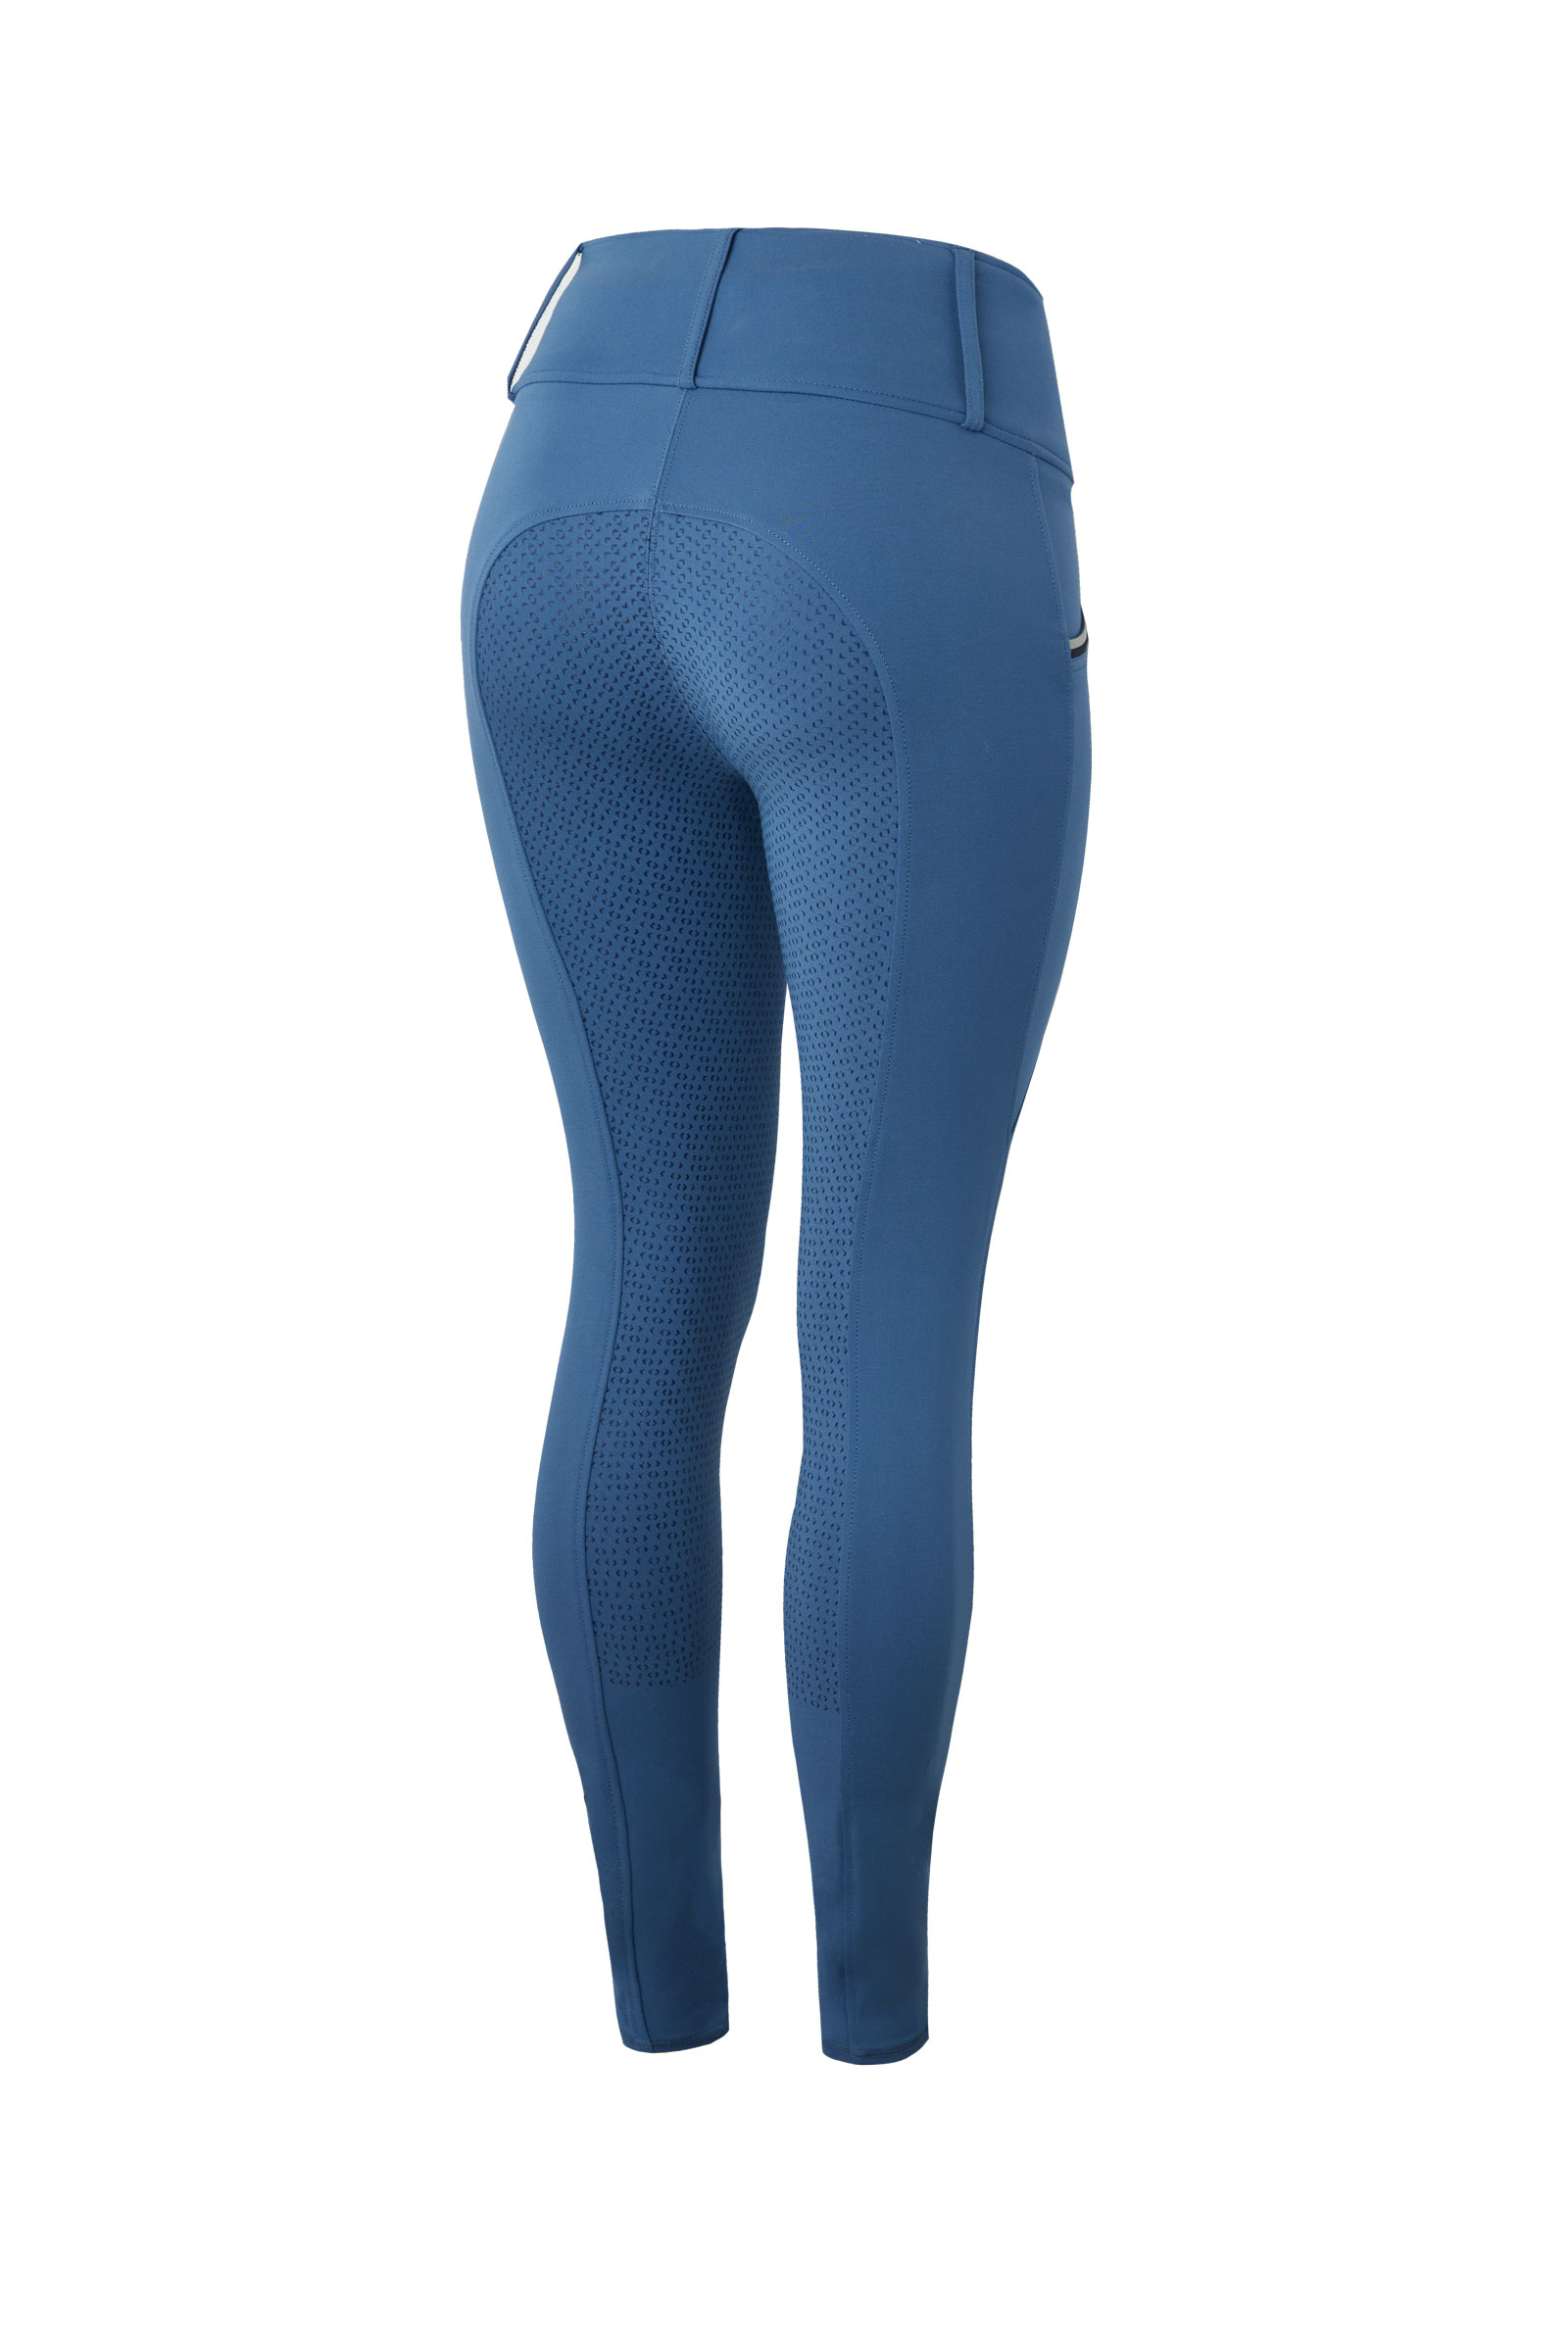 Buy Horze Lucinda Women's Full Seat Riding Tights with Large Pockets